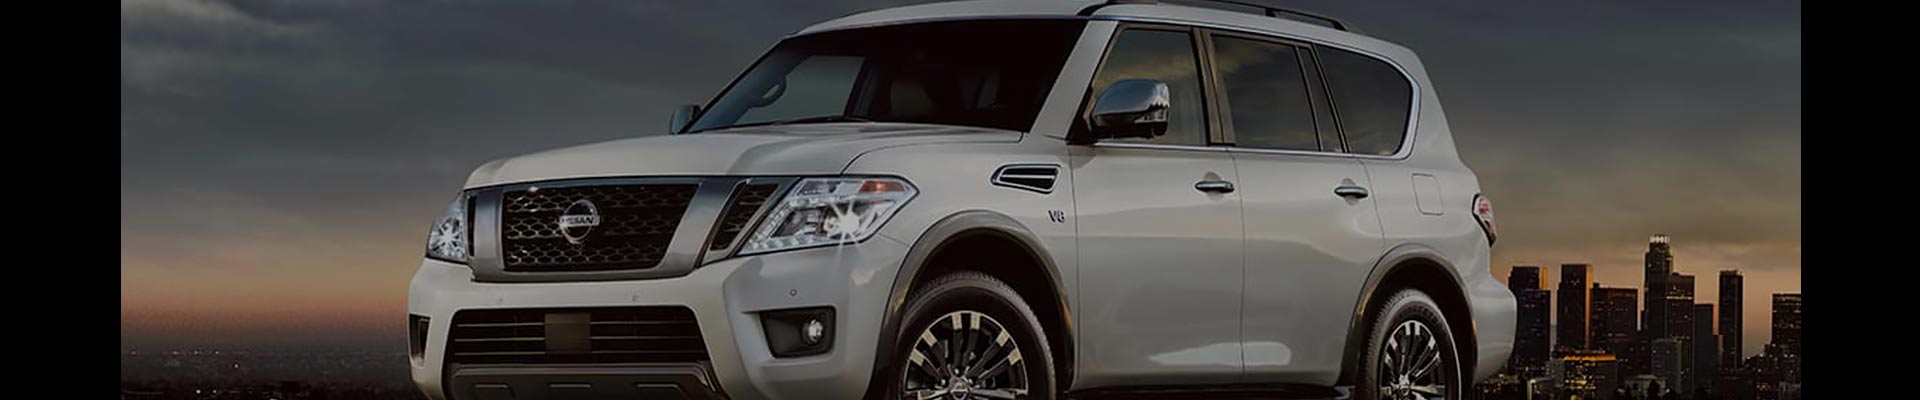 Shop Replacement and OEM 2018 Nissan Armada Parts with Discounted Price on the Net